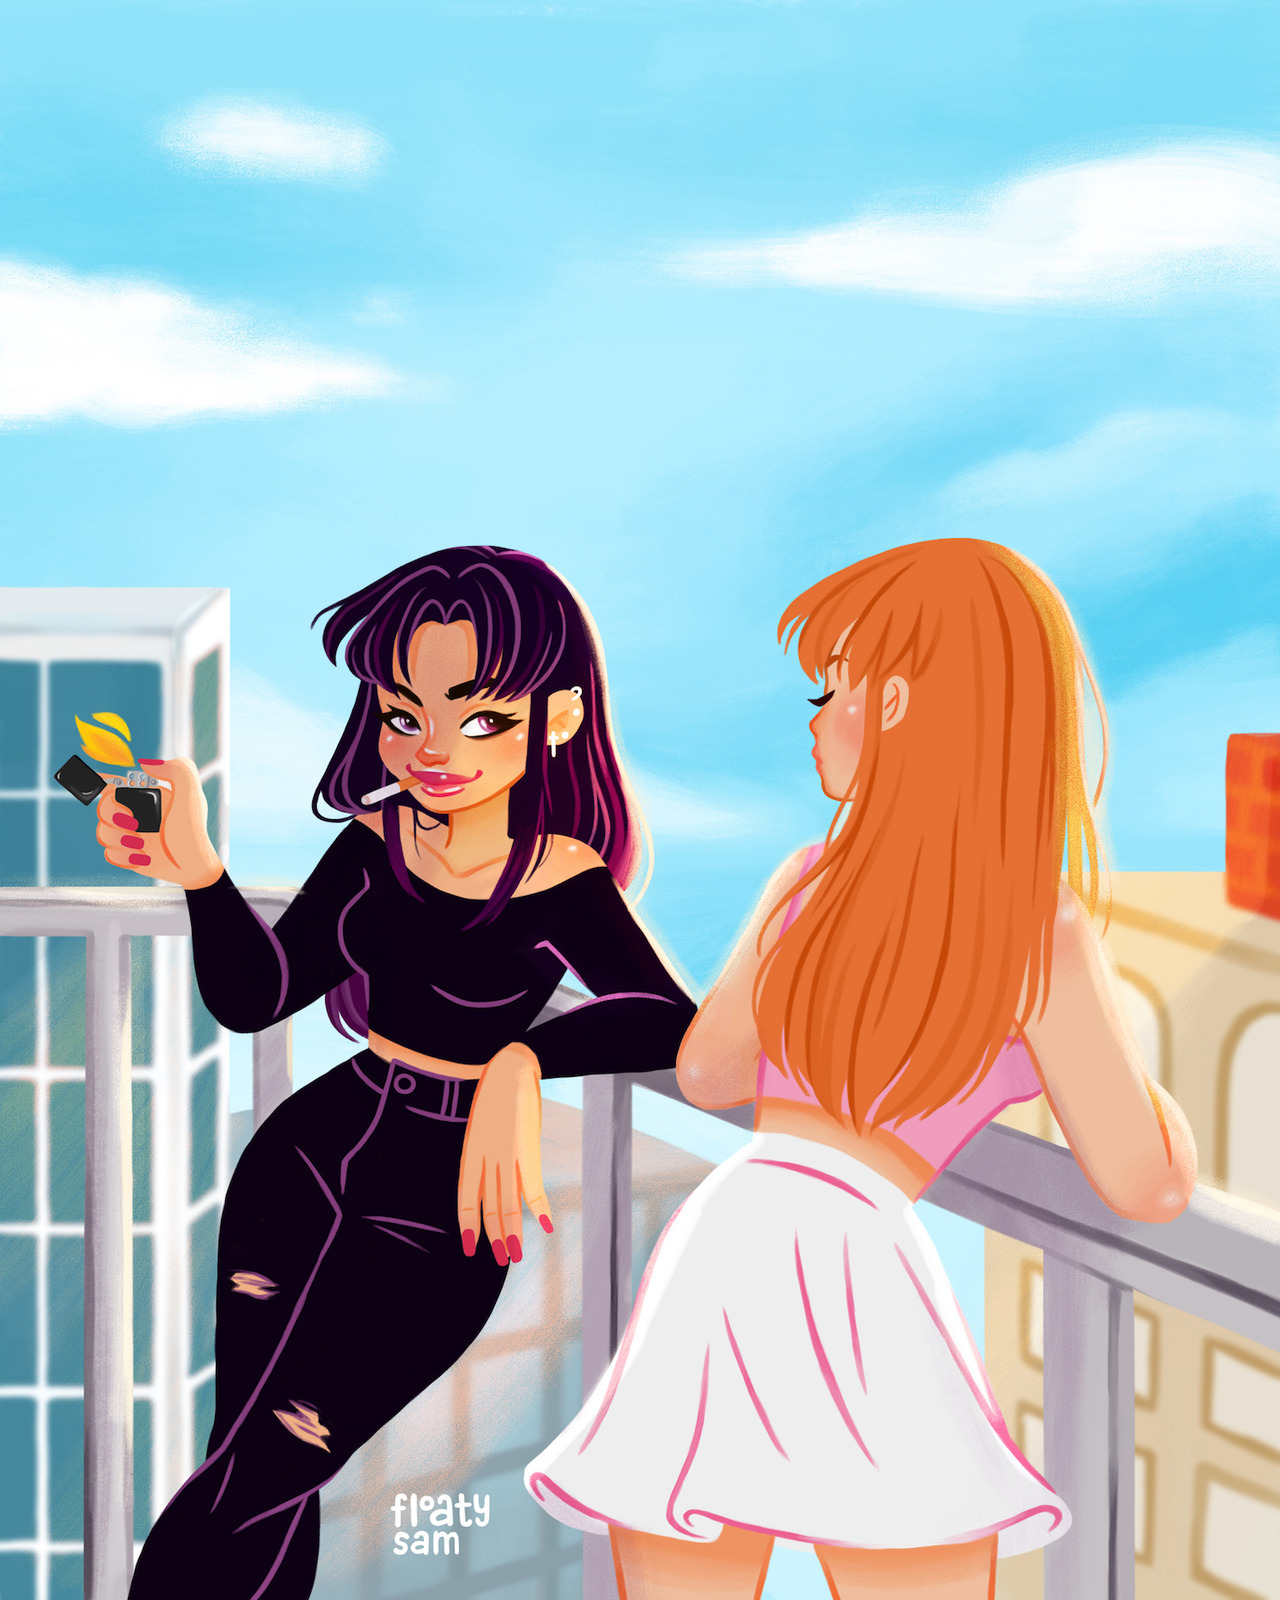 floatysam: “You wanna light?” Starfire trying to hang with her sis, Blackfire